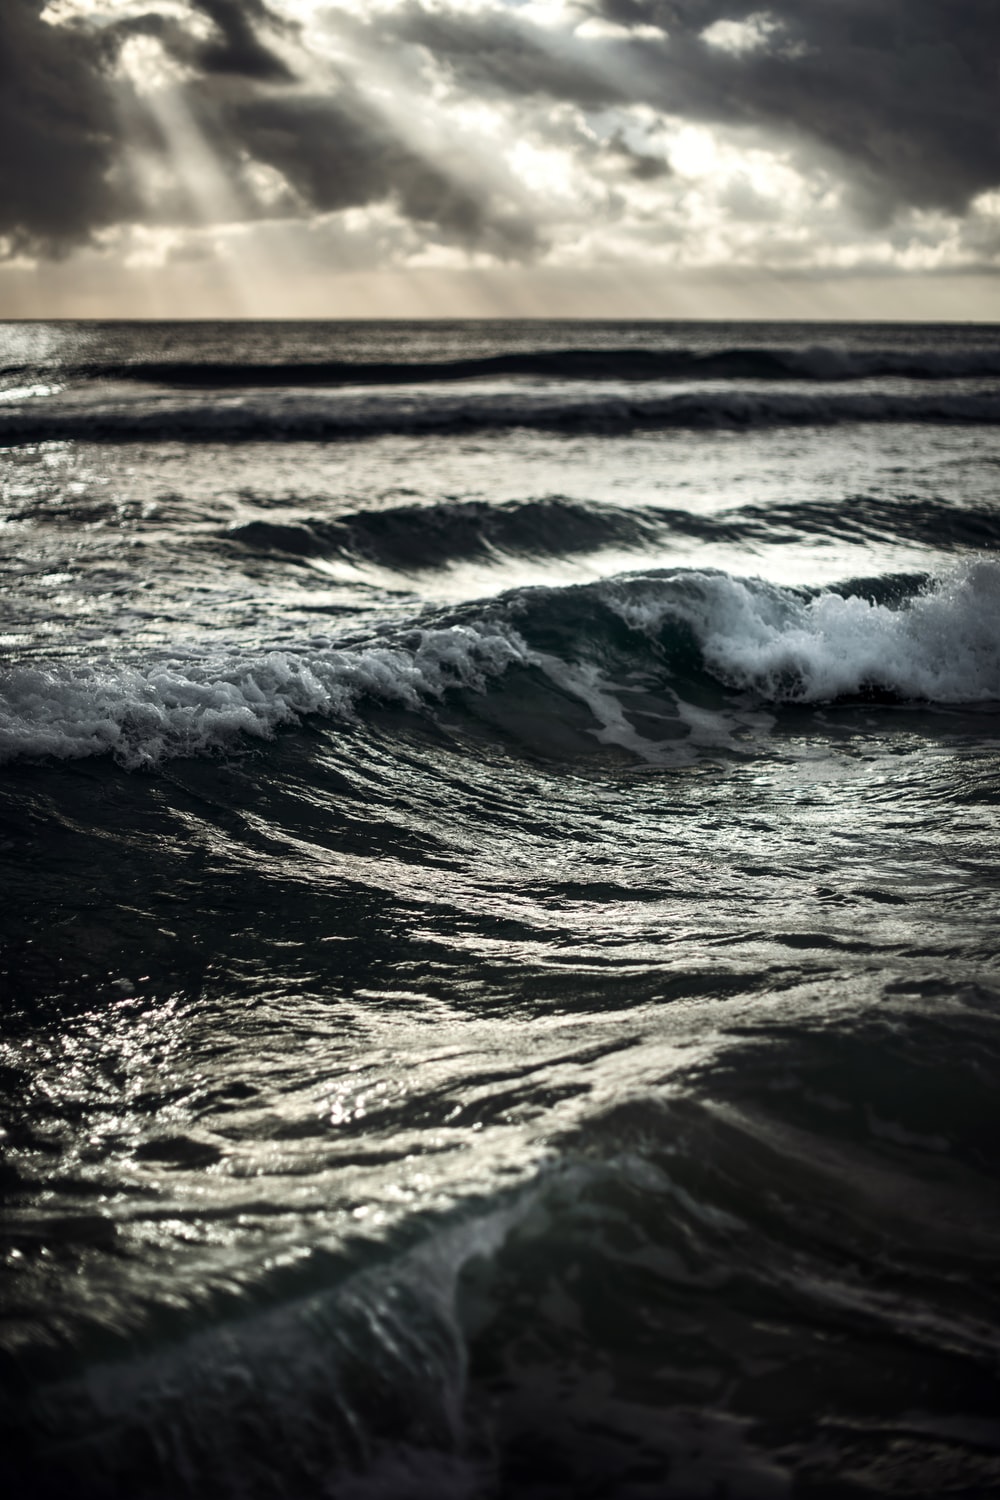 Stormy Seas Picture. Download Free Image